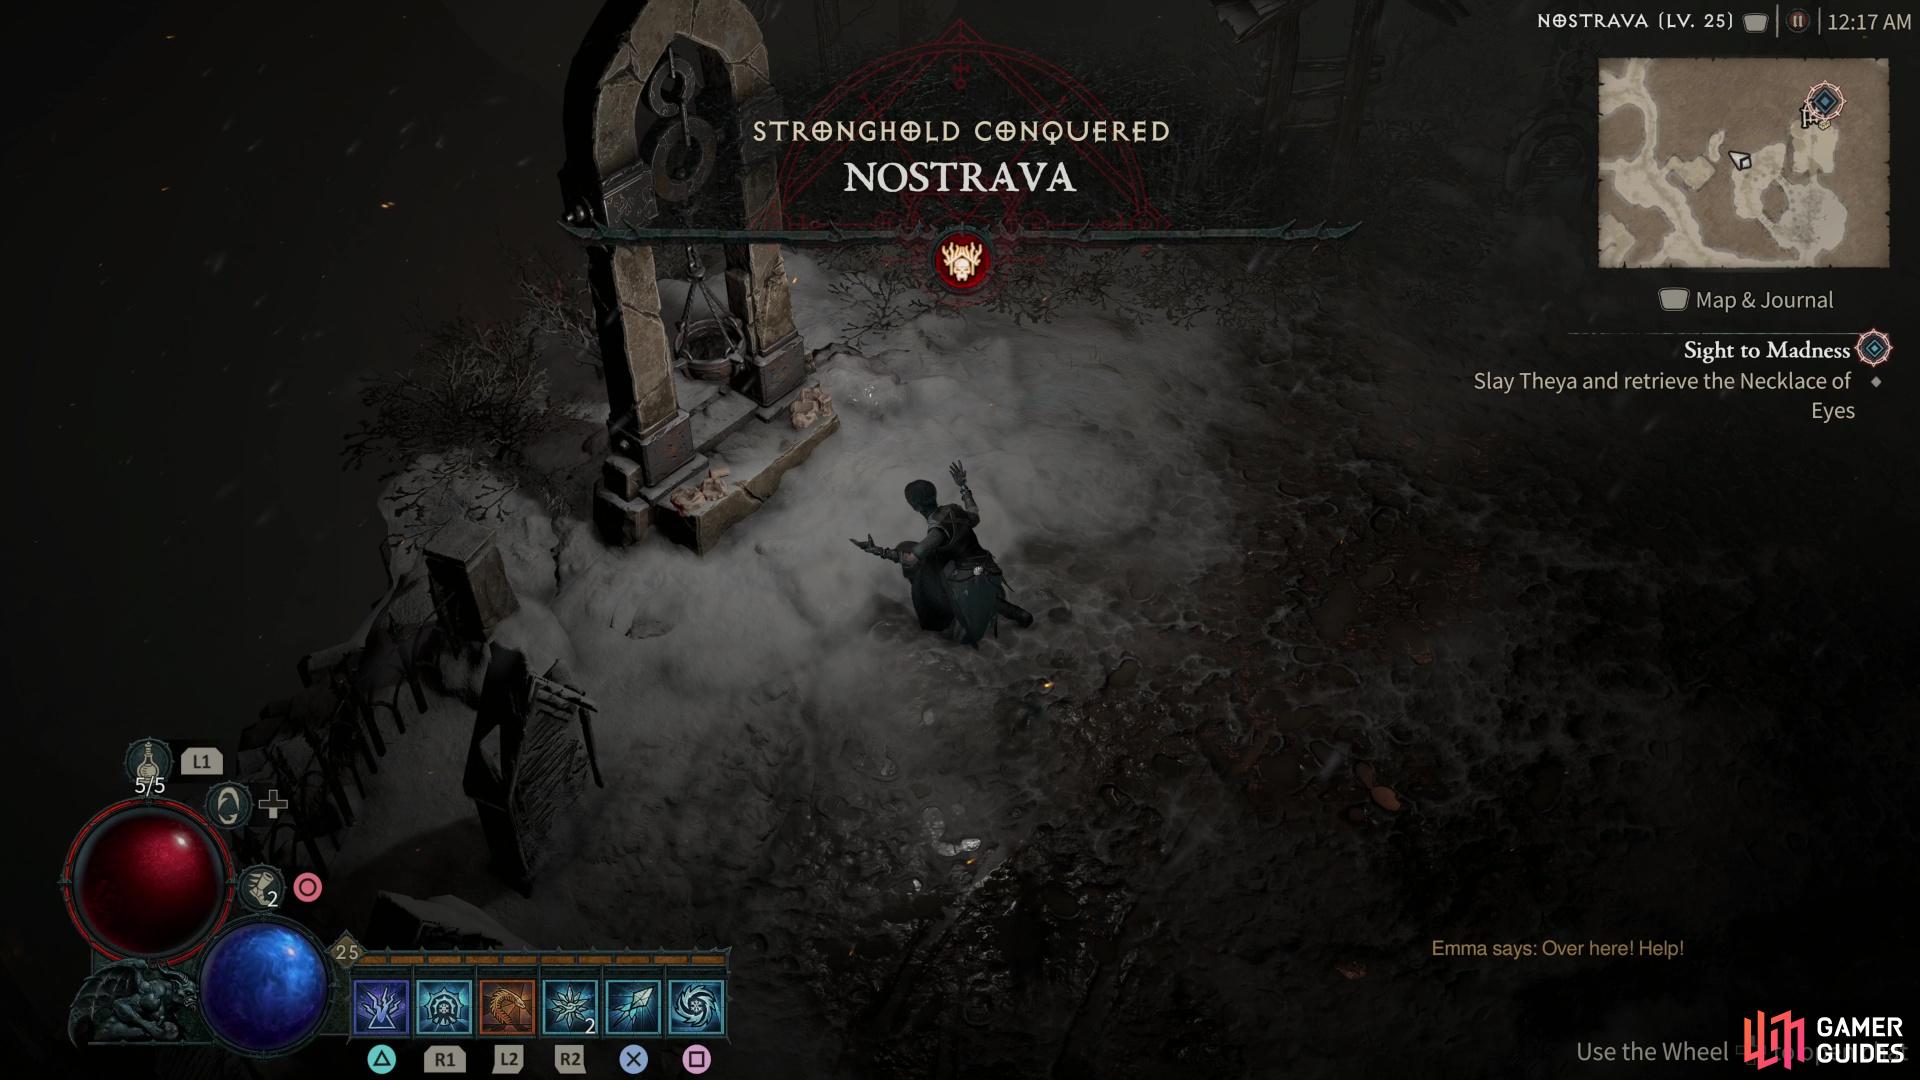 Defeat the three succubi and interact with the Wander's Shrine to make good on your conquest of Nostrava.